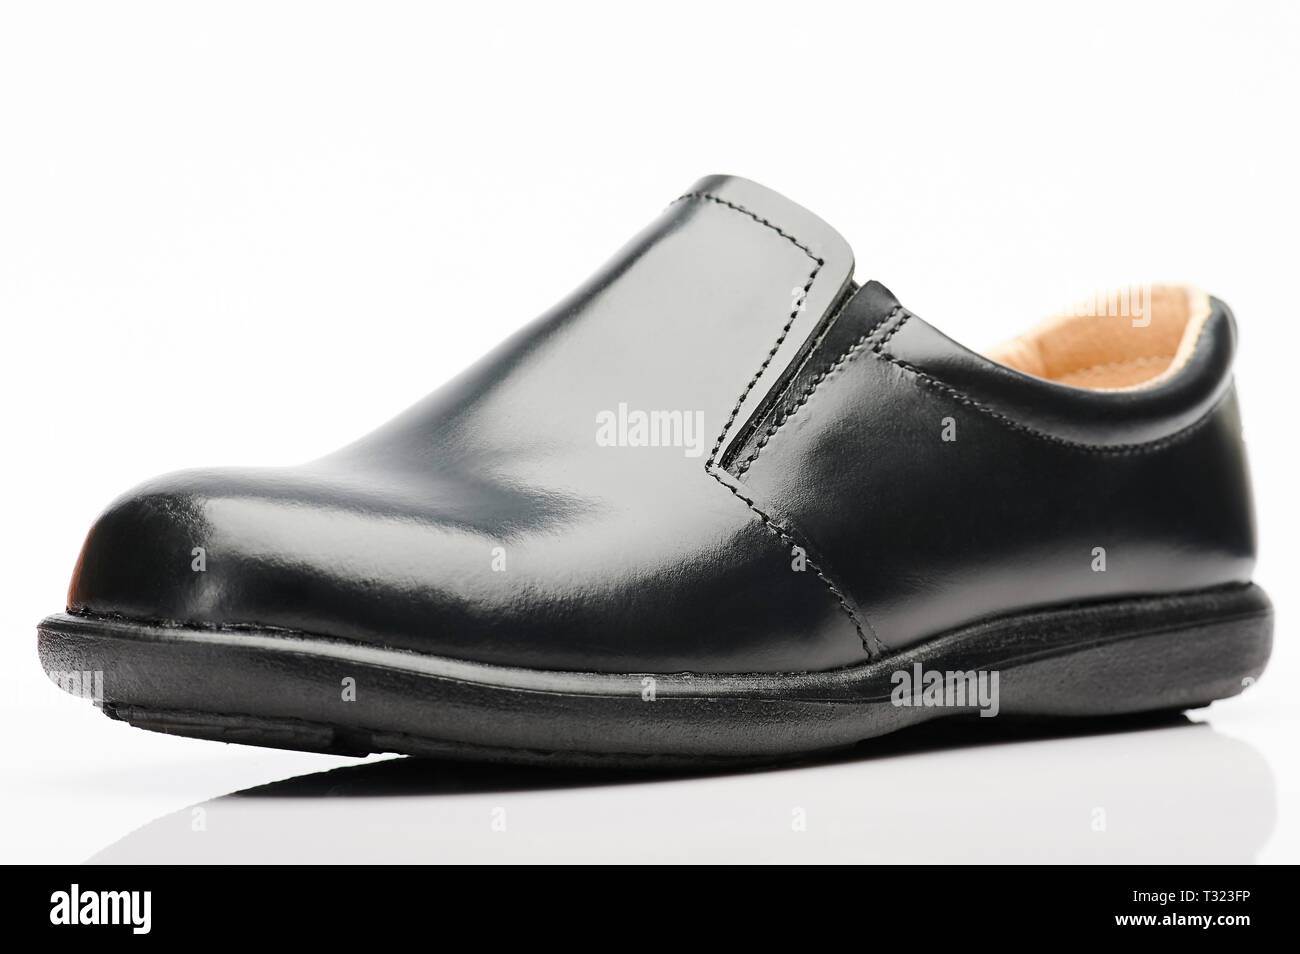 Black shoe with no laces isolated on white background Stock Photo